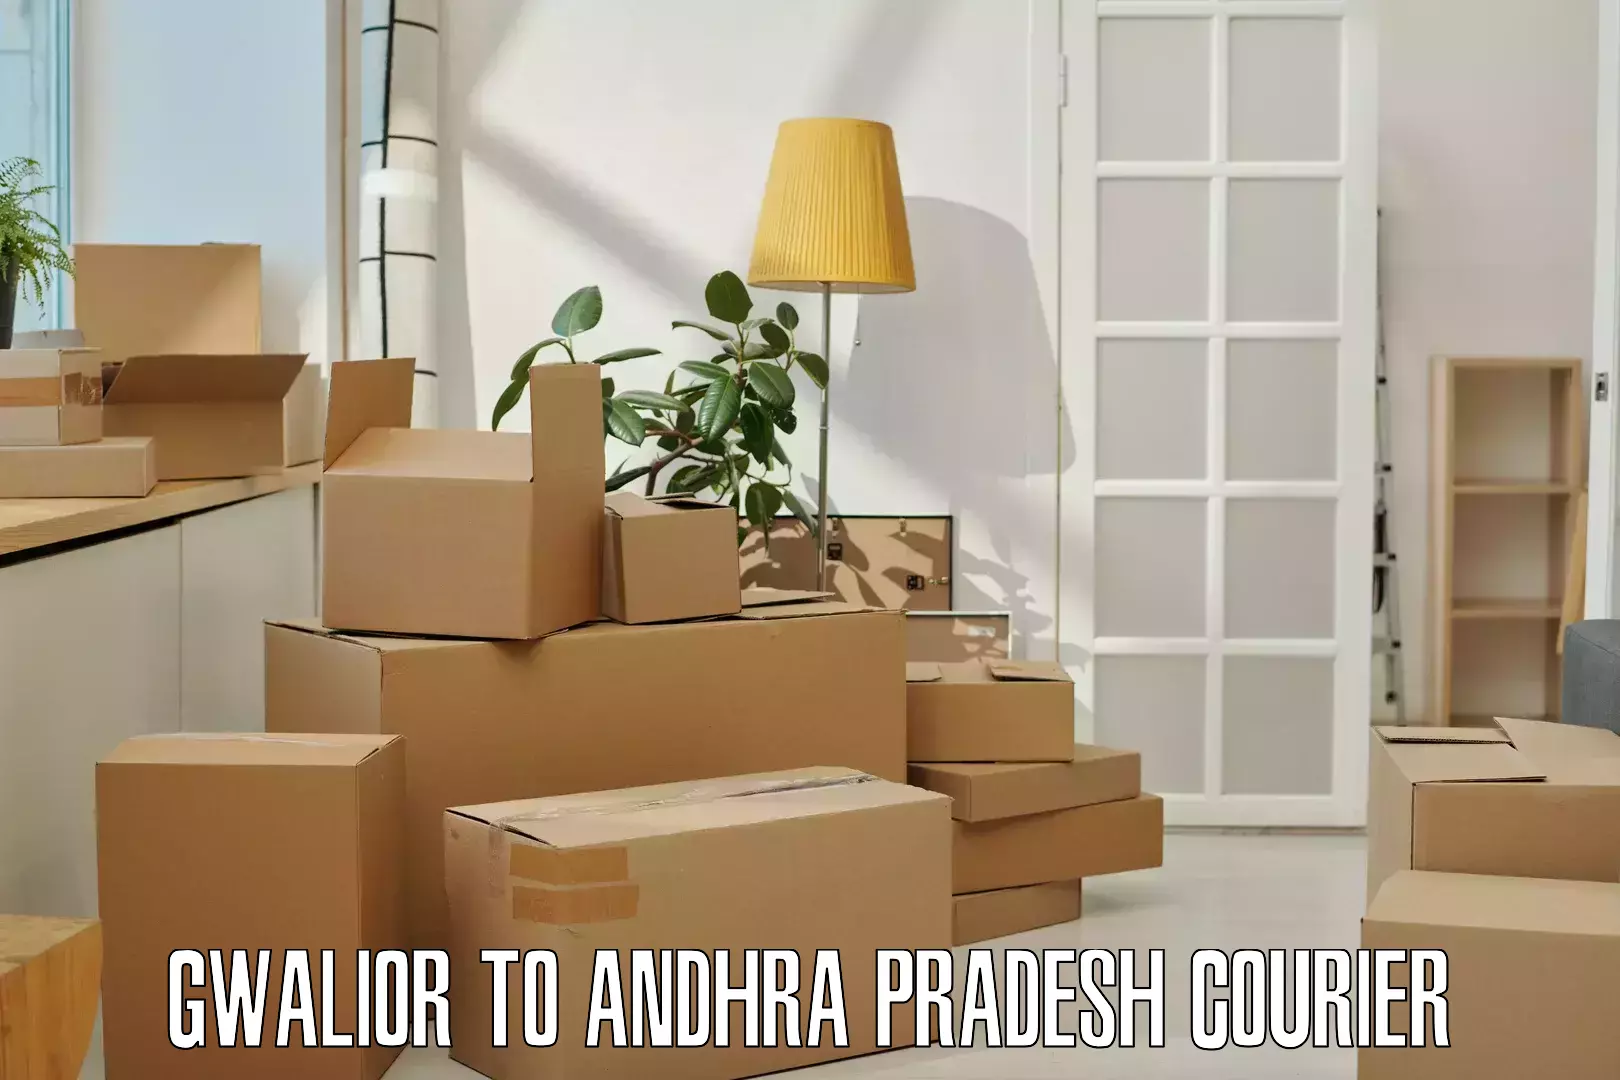 Full-service courier options Gwalior to Guntakal